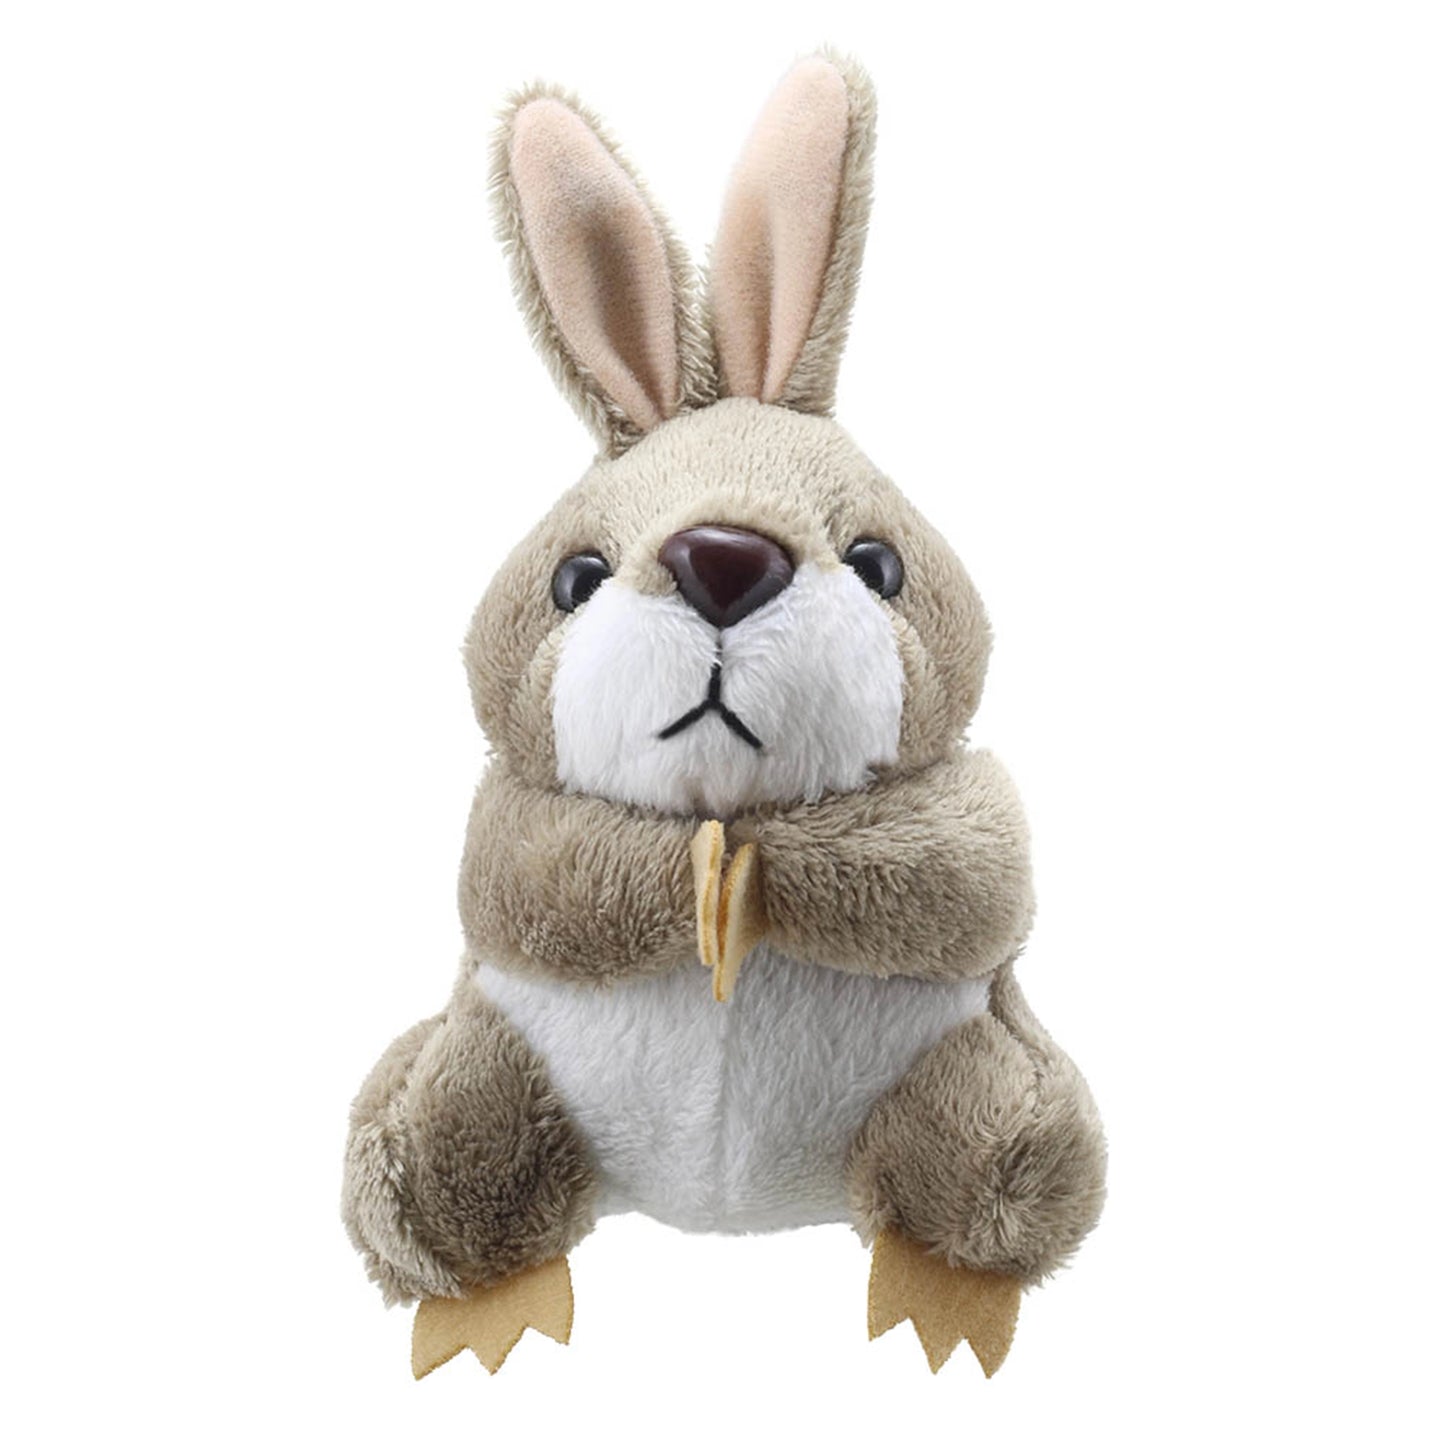 Rabbit (Grey) Finger Puppet - The Puppet Company - The Forgotten Toy Shop